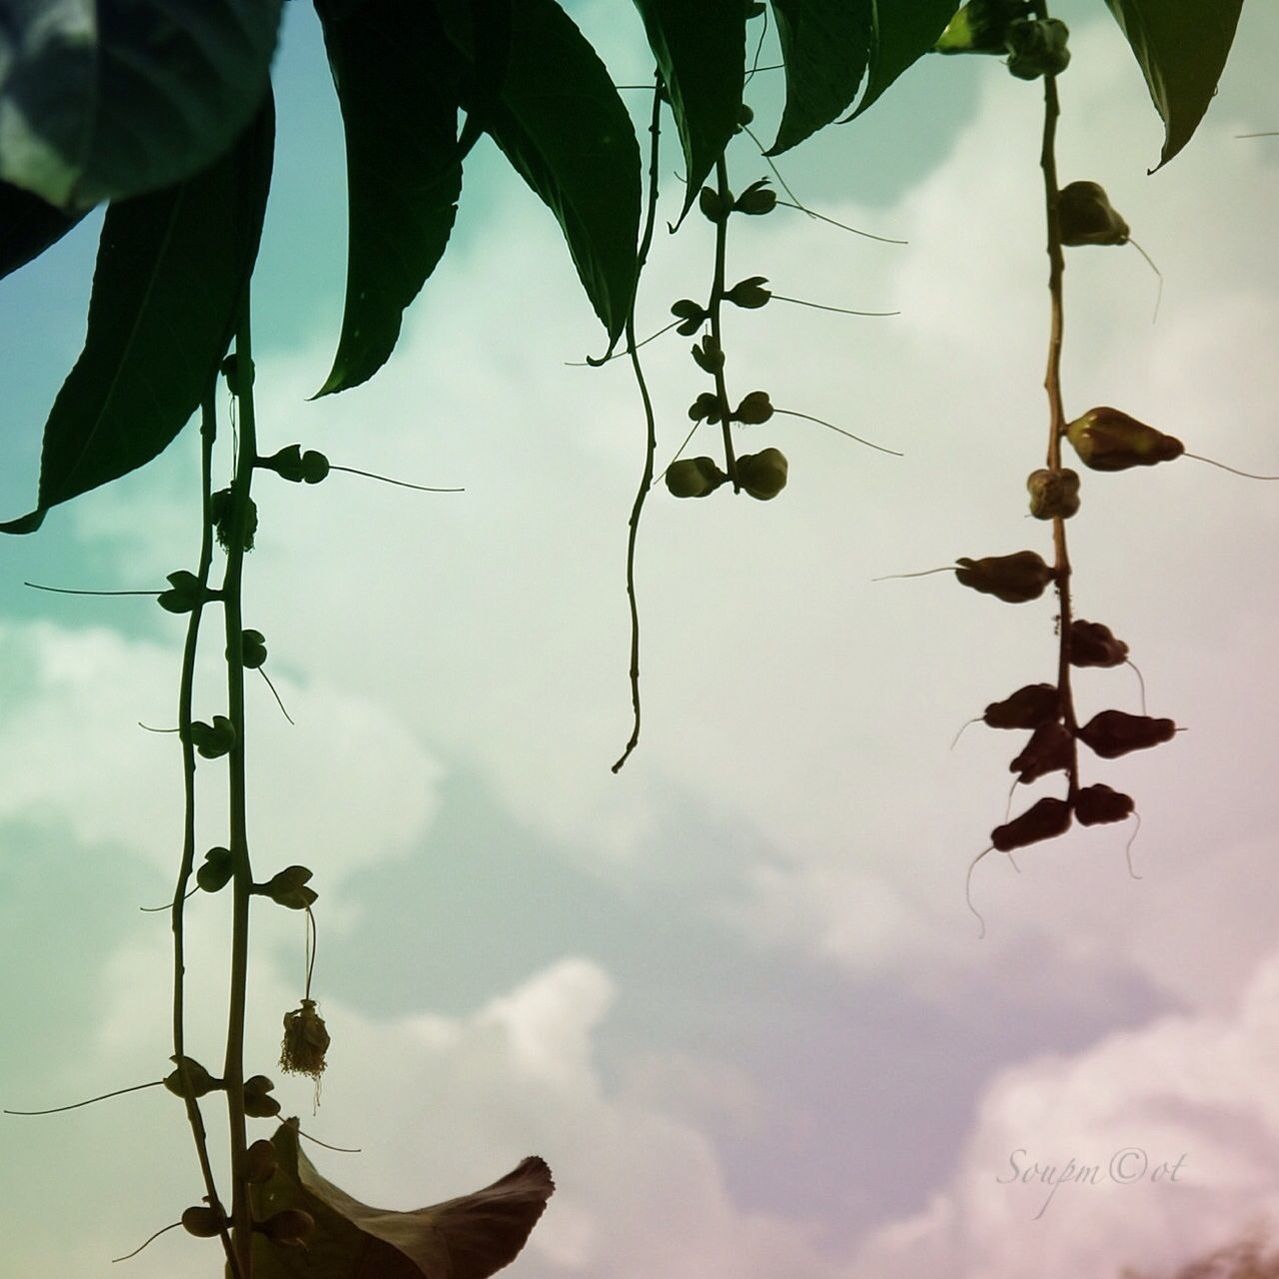 low angle view, sky, tree, cloud - sky, leaf, hanging, branch, nature, cloud, cloudy, outdoors, day, no people, growth, beauty in nature, tranquility, close-up, twig, silhouette, focus on foreground